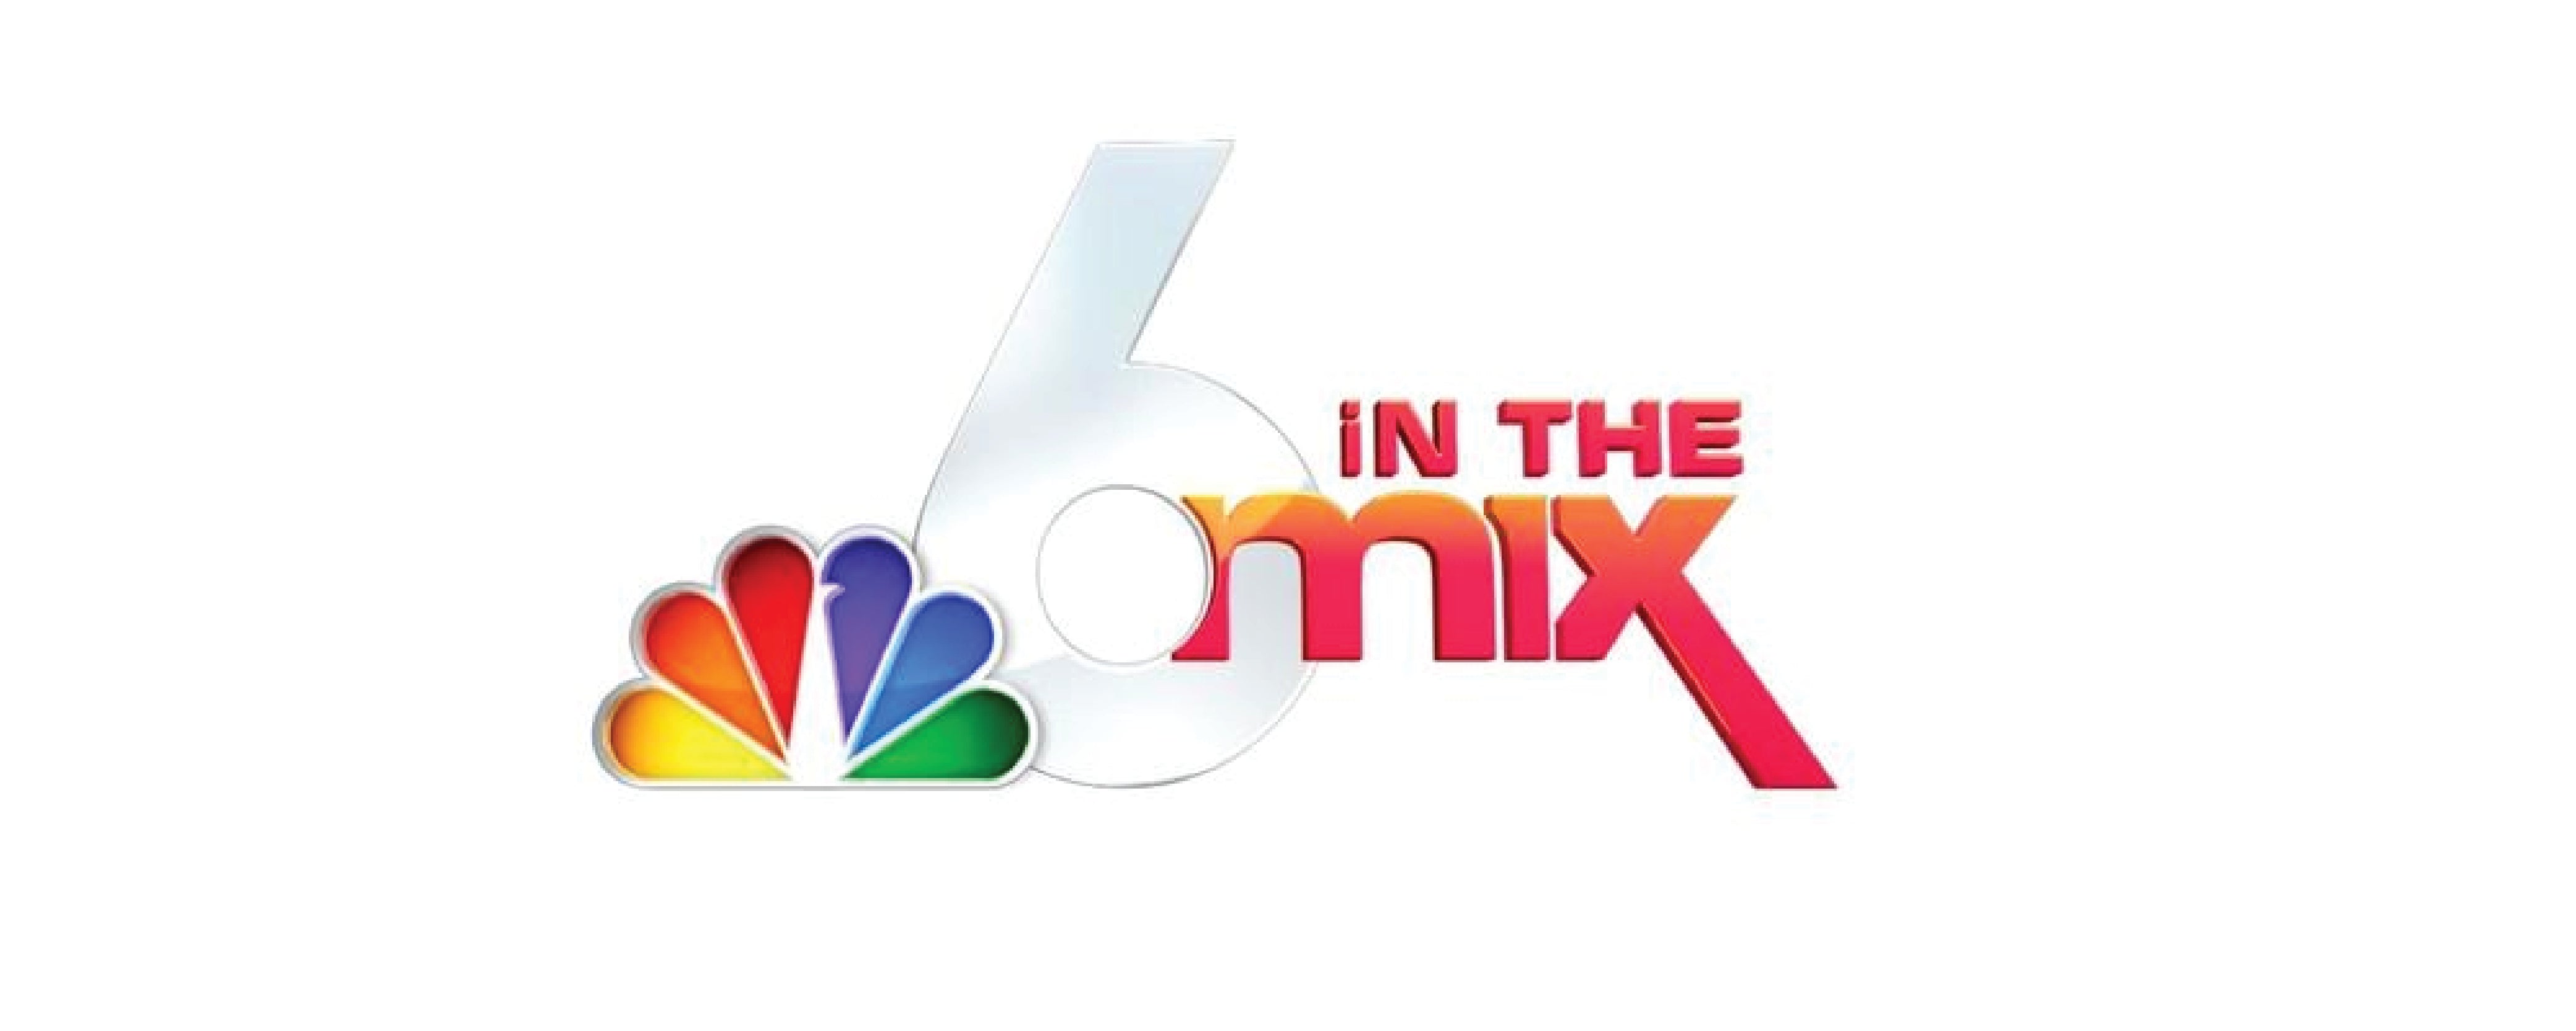 Featured on NBC's 6 in the Mix